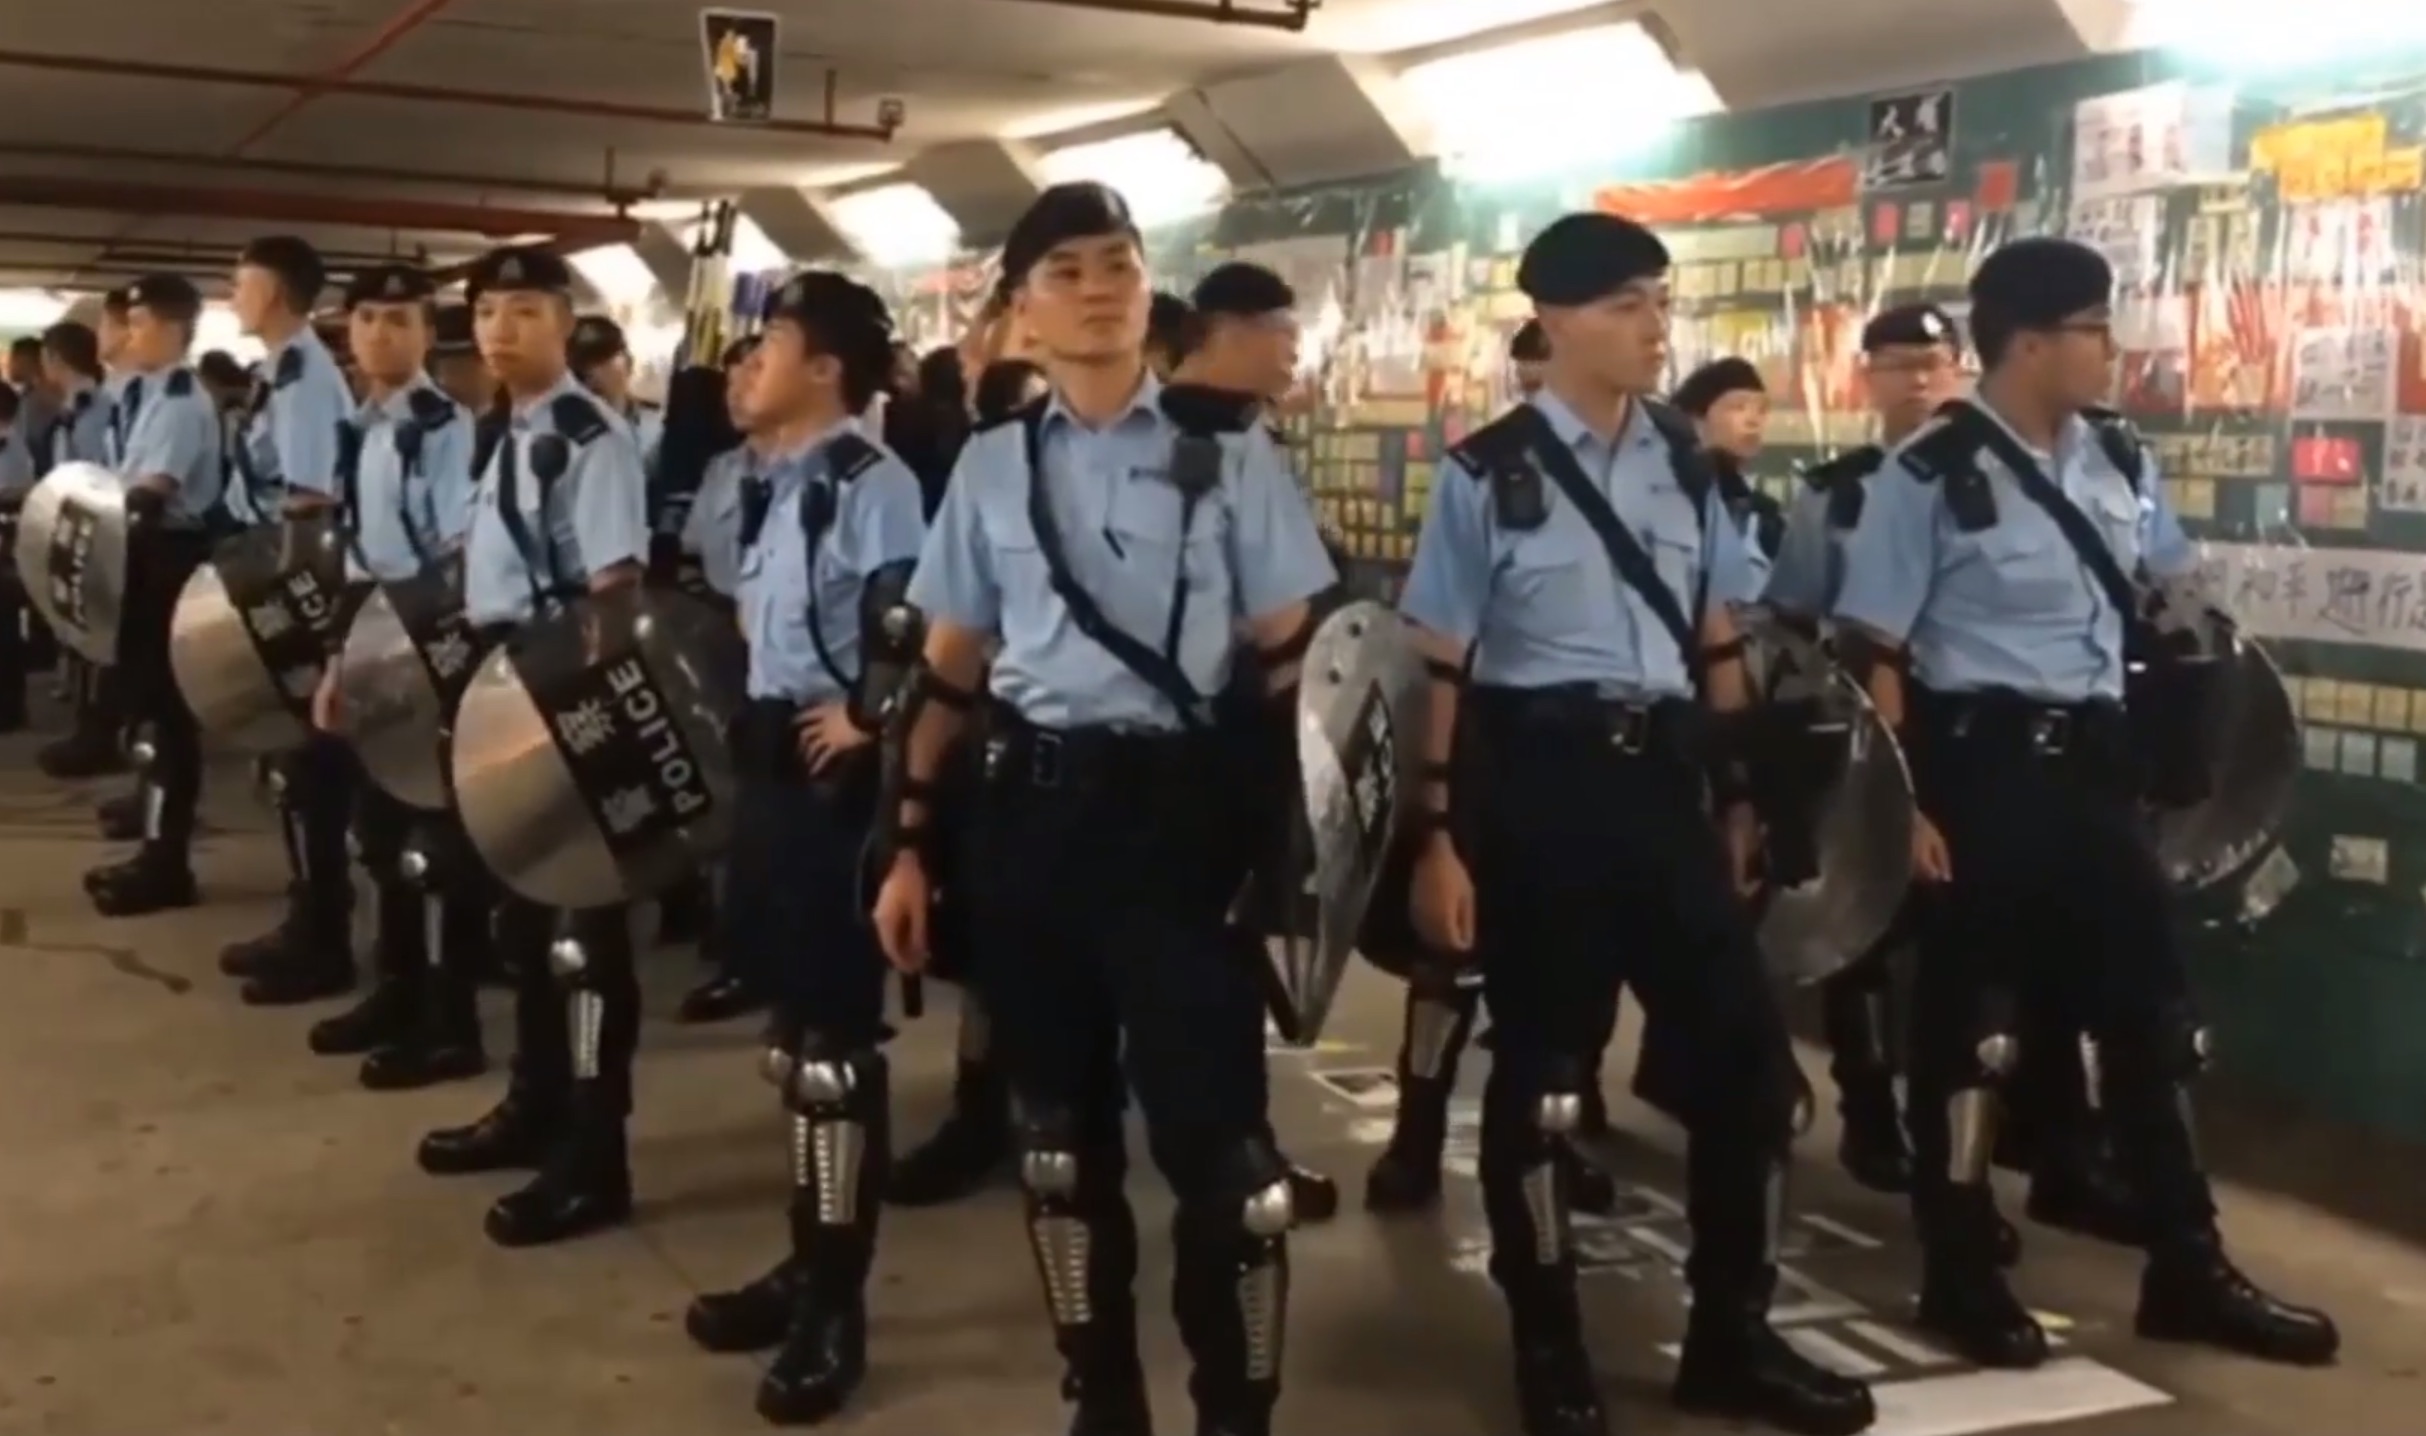 Cops in riot gear secure a pedestrian tunnel in Tai Po where the personal details of an officer were posted. Screengrab via YouTube.